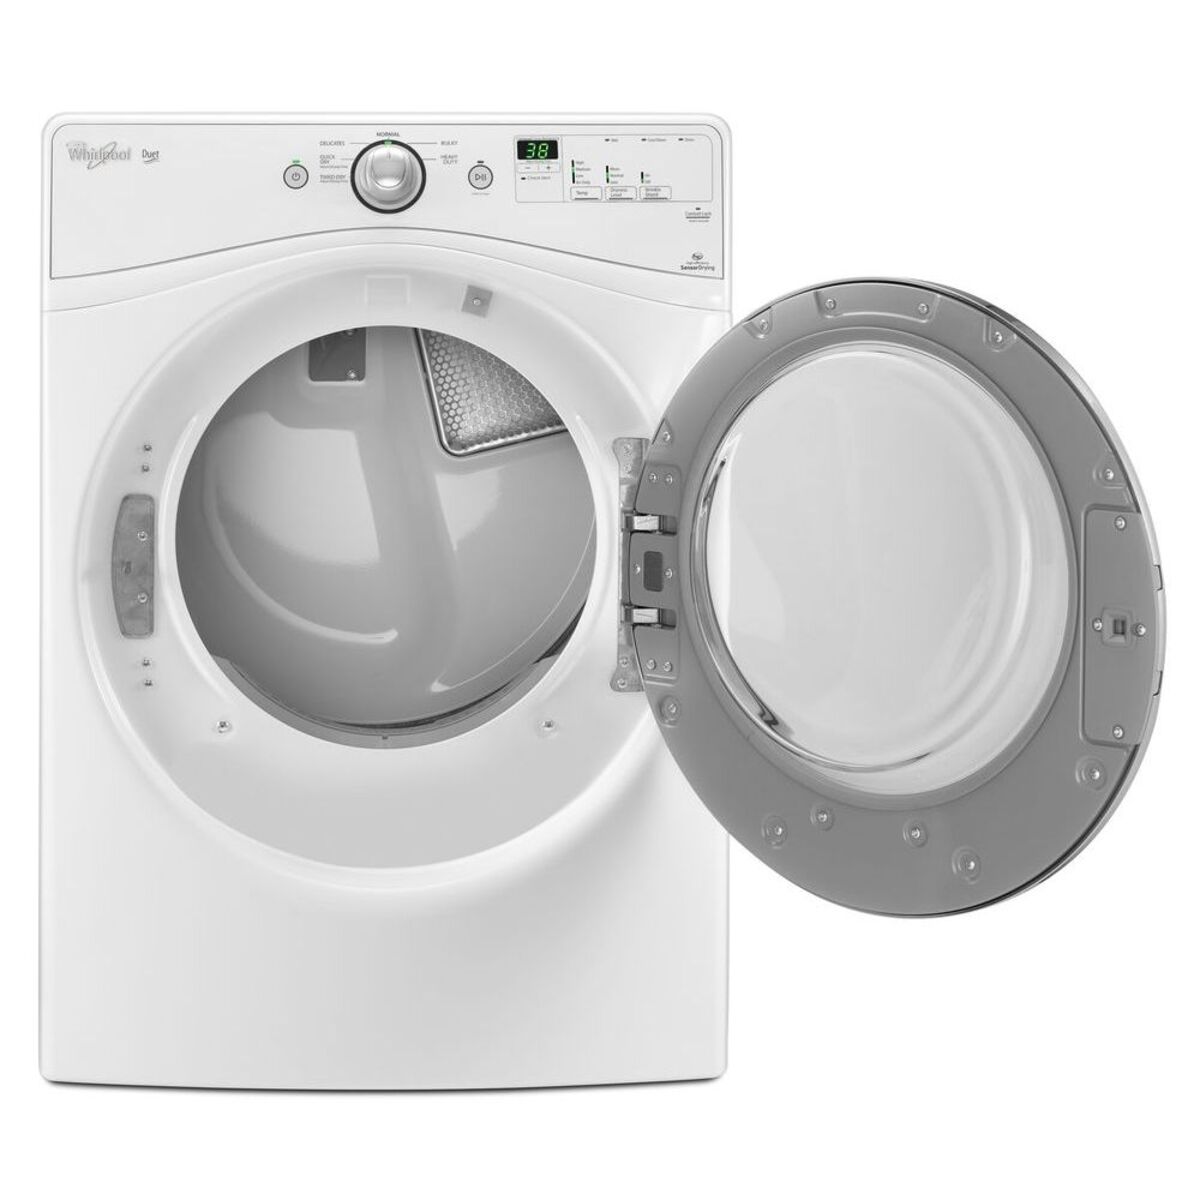 How To Fix The Error Code F79 For Whirlpool Dryer